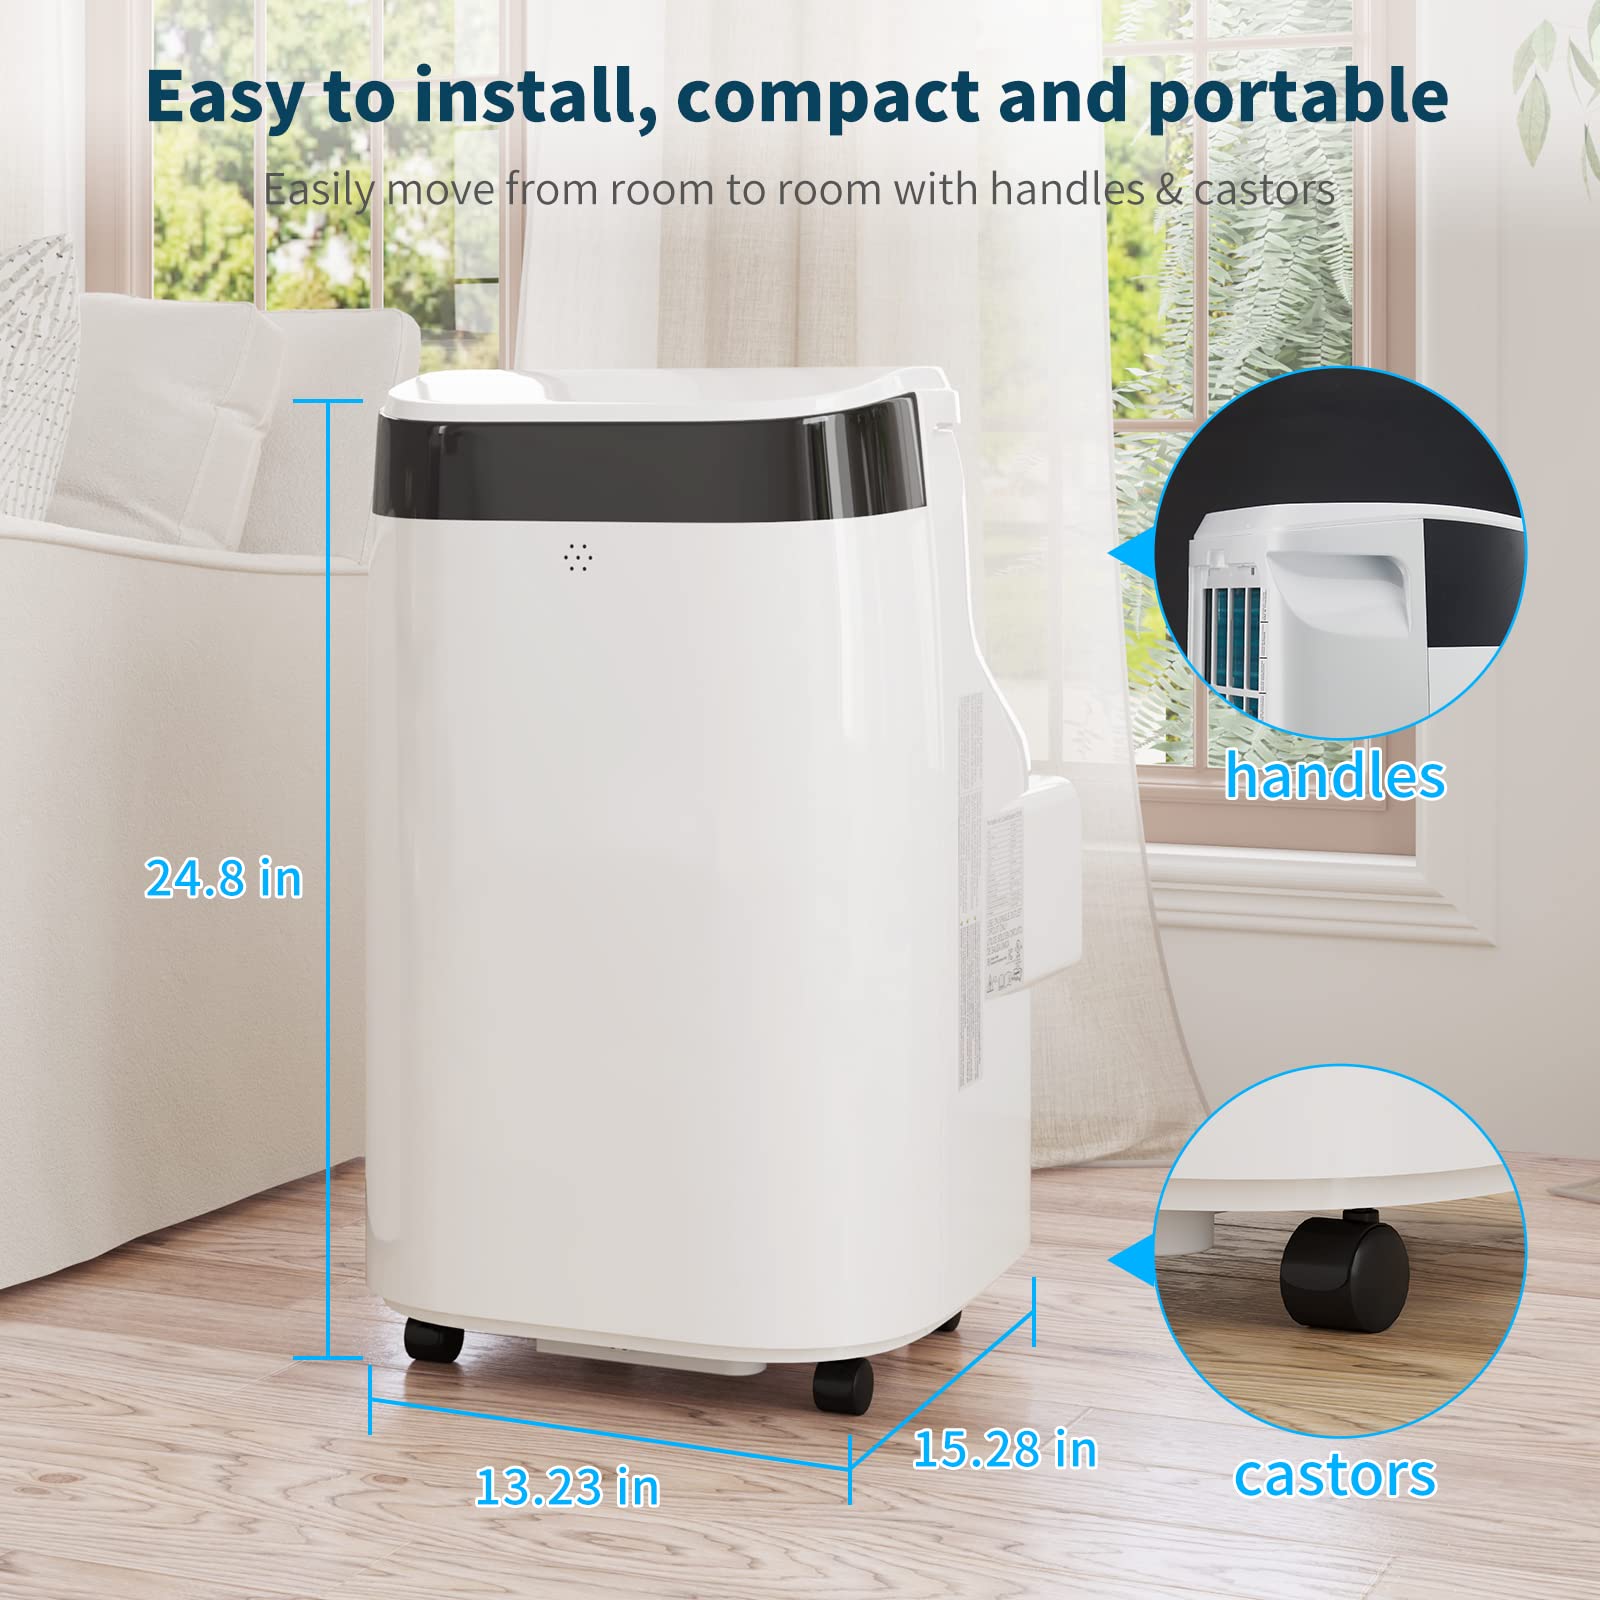 Jojoka Portable Air Conditioner with Remote Control, 10000 BTU Portable AC for Room, Dorm, Office with Drying, Fan, Sleep Mode, 3 Speeds, 24H Timer Function, Cools Room up to 450 Sq. ft